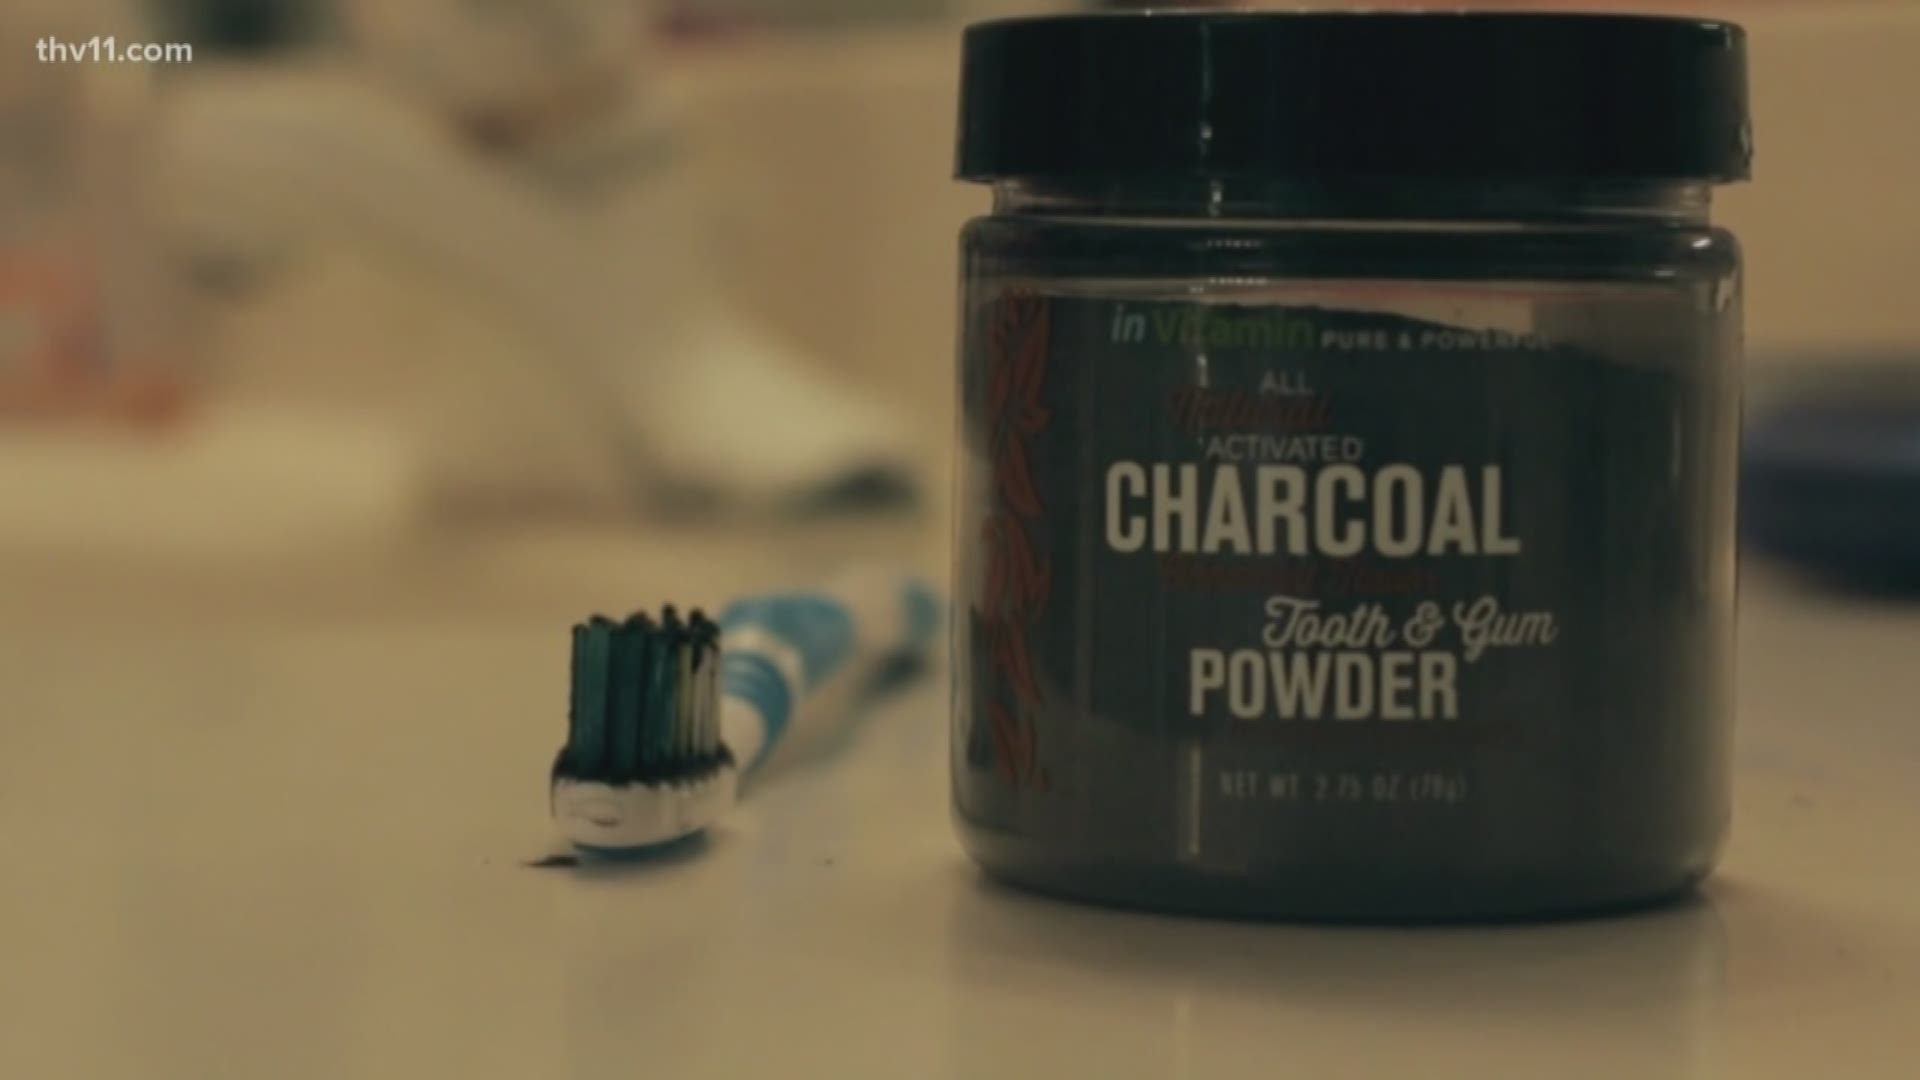 You've likely seen the ads of activated charcoal toothpaste or powder on your social media. But with every fad, you have a question: Does it really work?